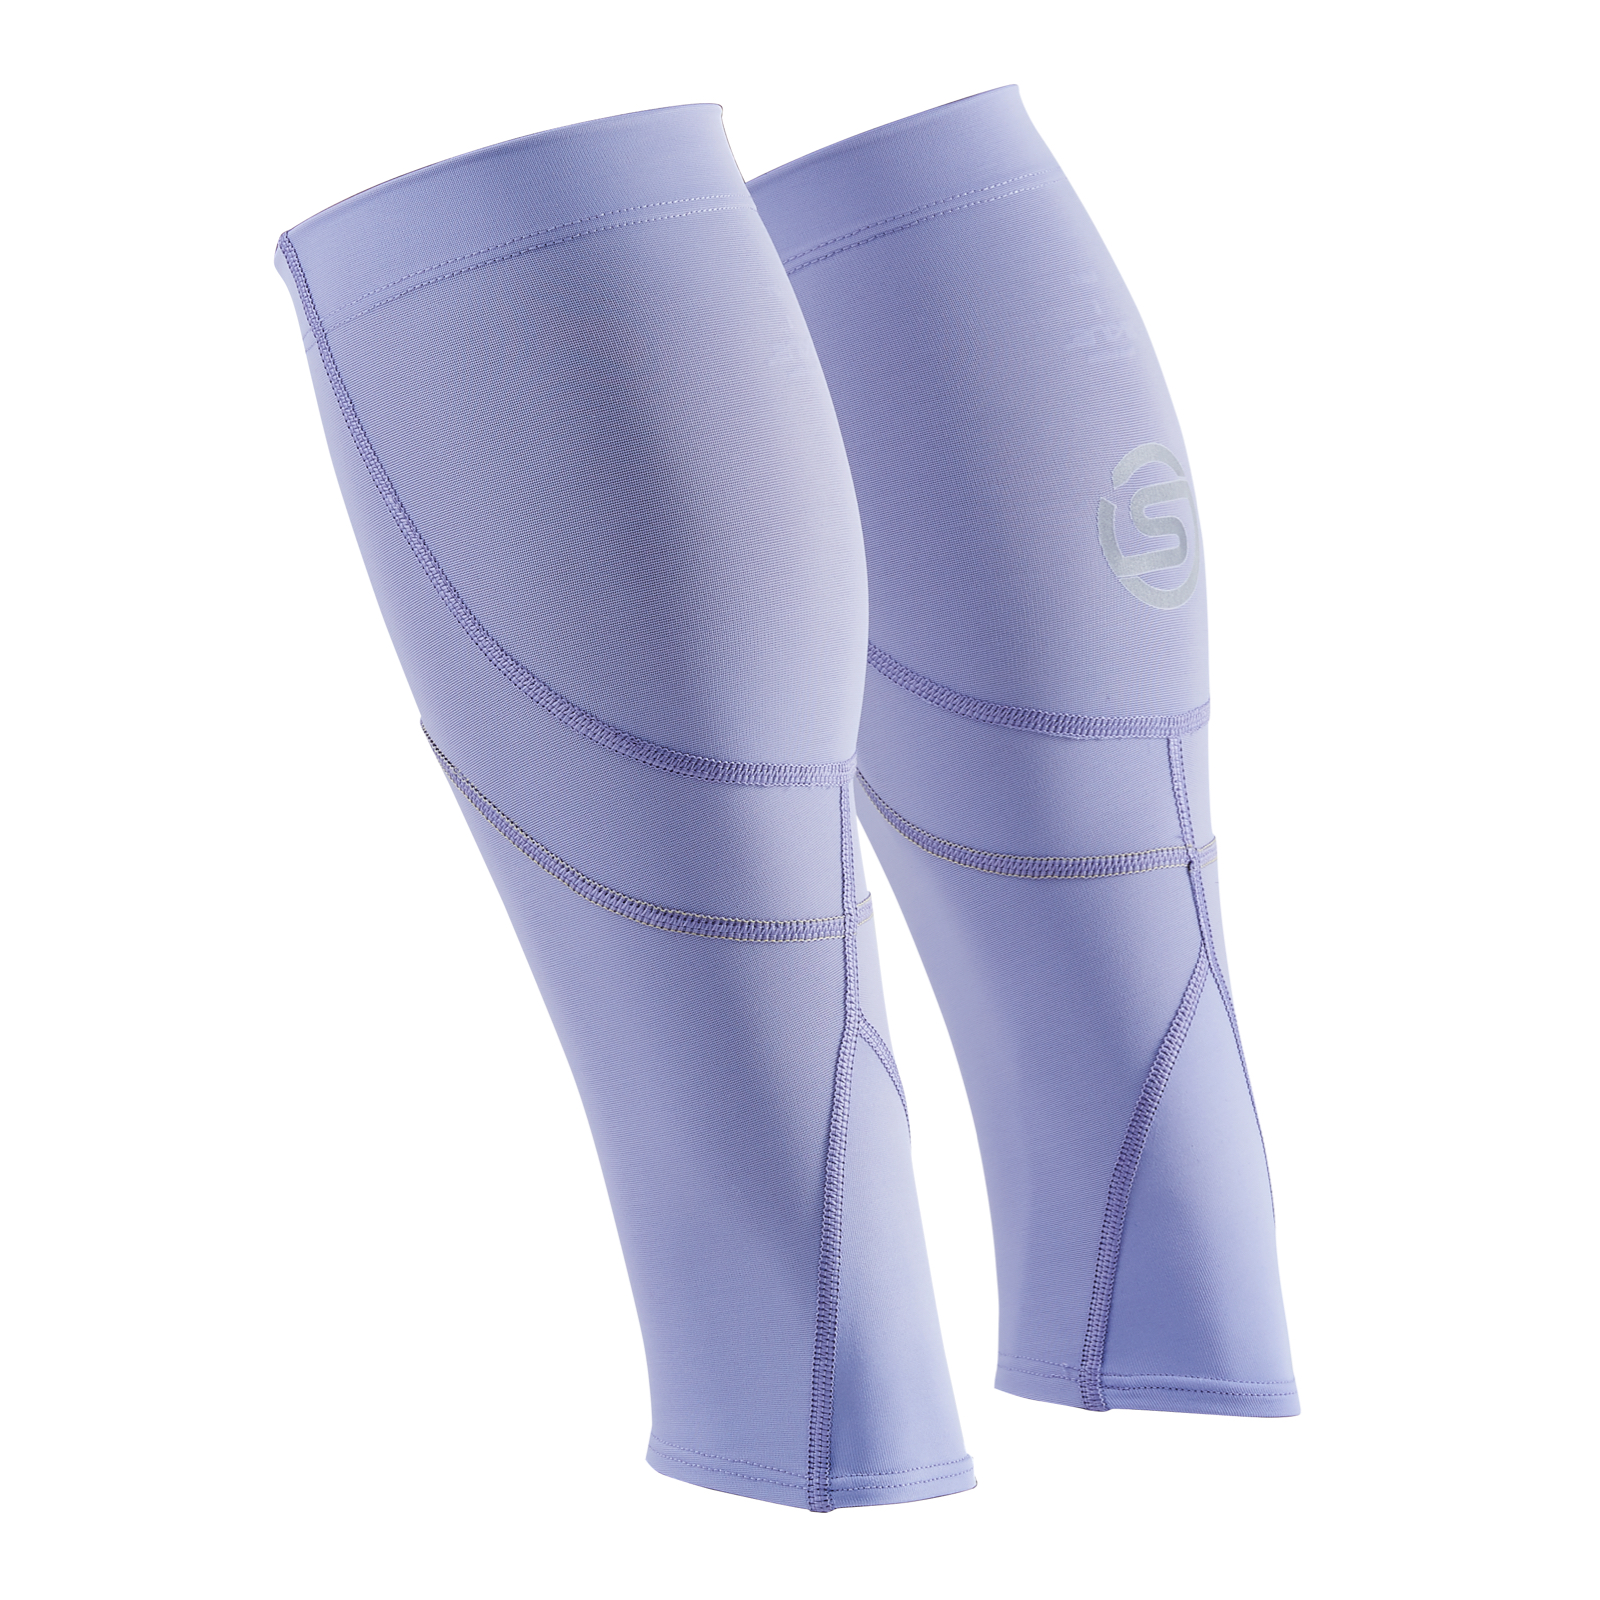 SKINS SERIES-3 UNISEX MX CALF SLEEVES THISTLE DOWN - SKINS Compression USA